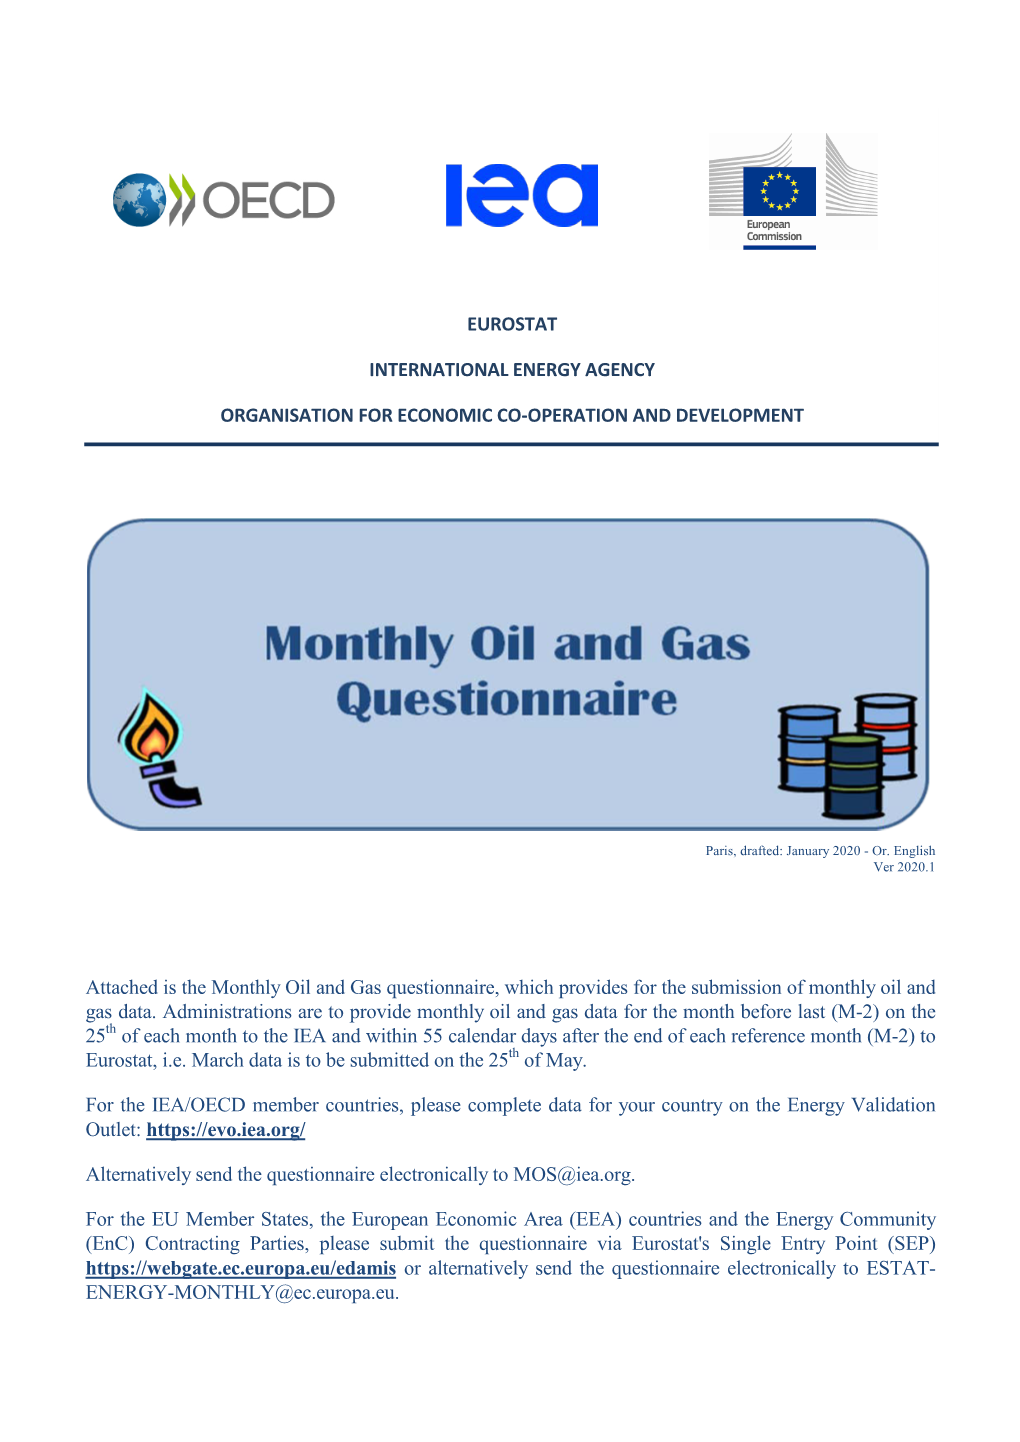 Monthly Oil and Gas Questionnaire, Which Provides for the Submission of Monthly Oil and Gas Data